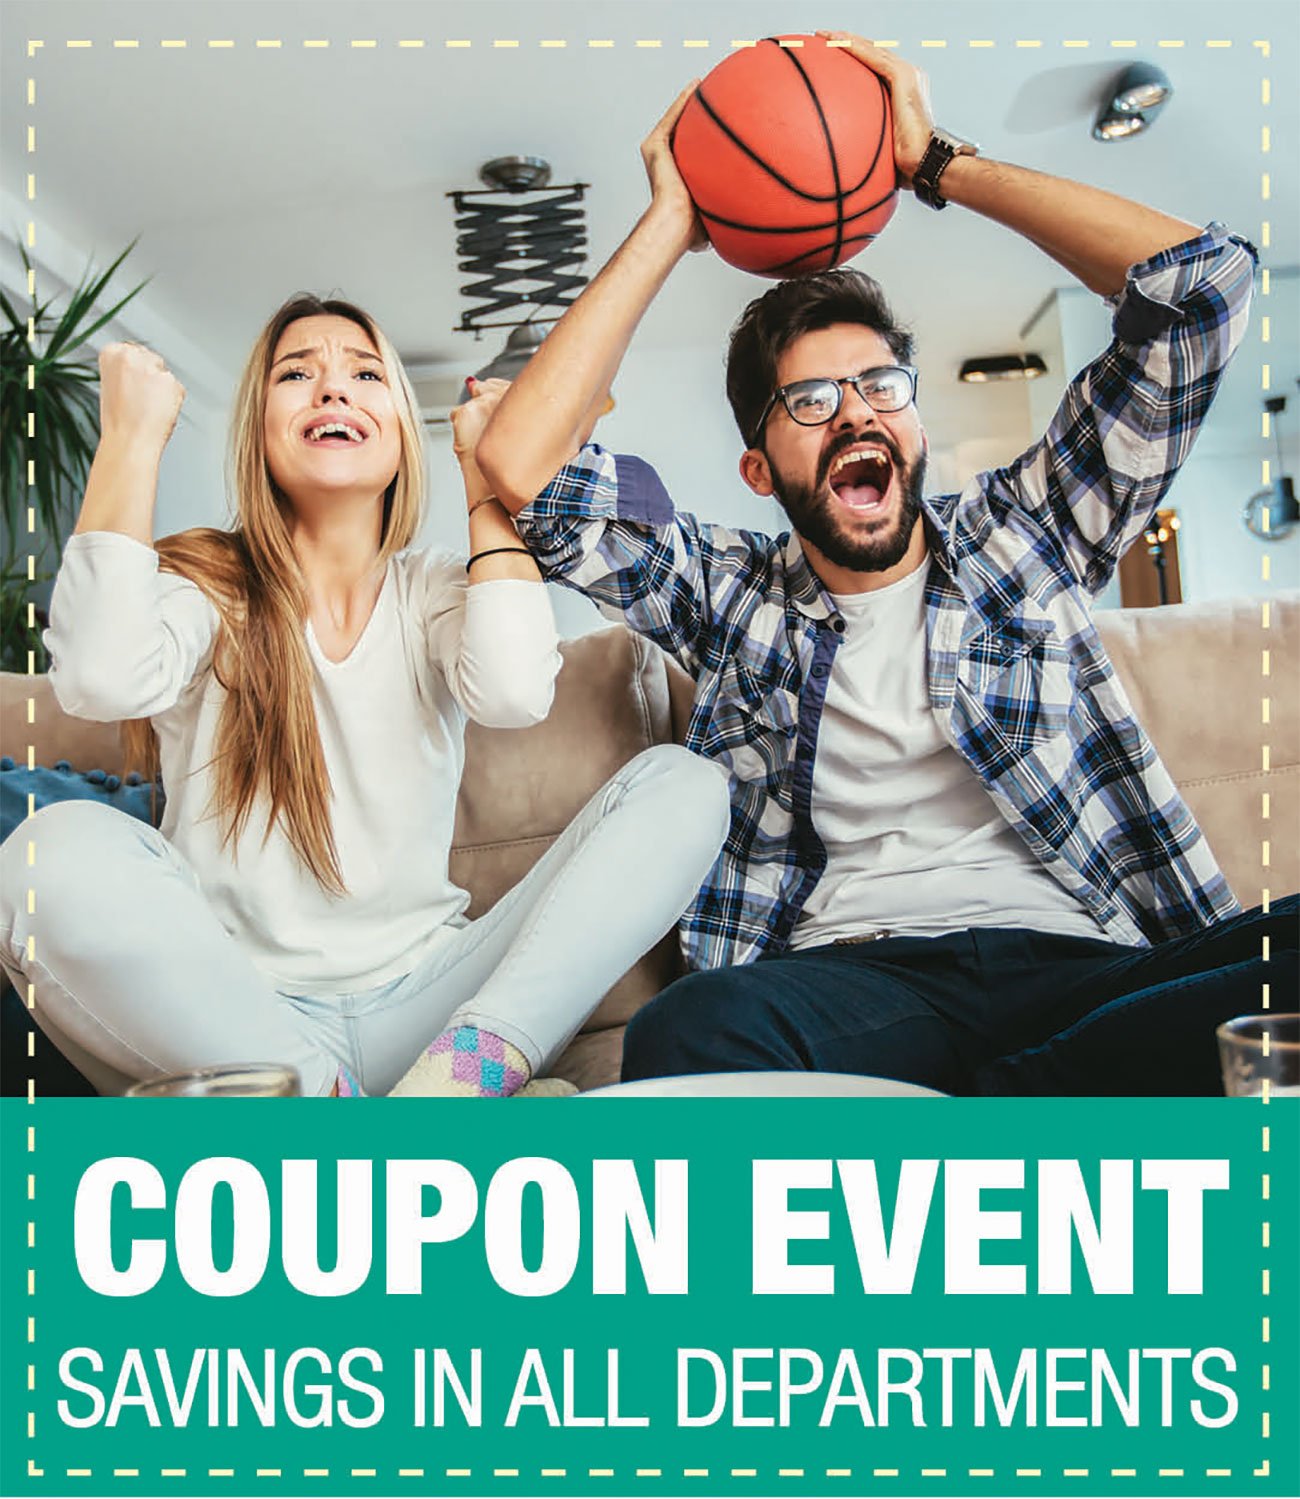 Coupon-Event-Couple-Watching-Basketball-Header